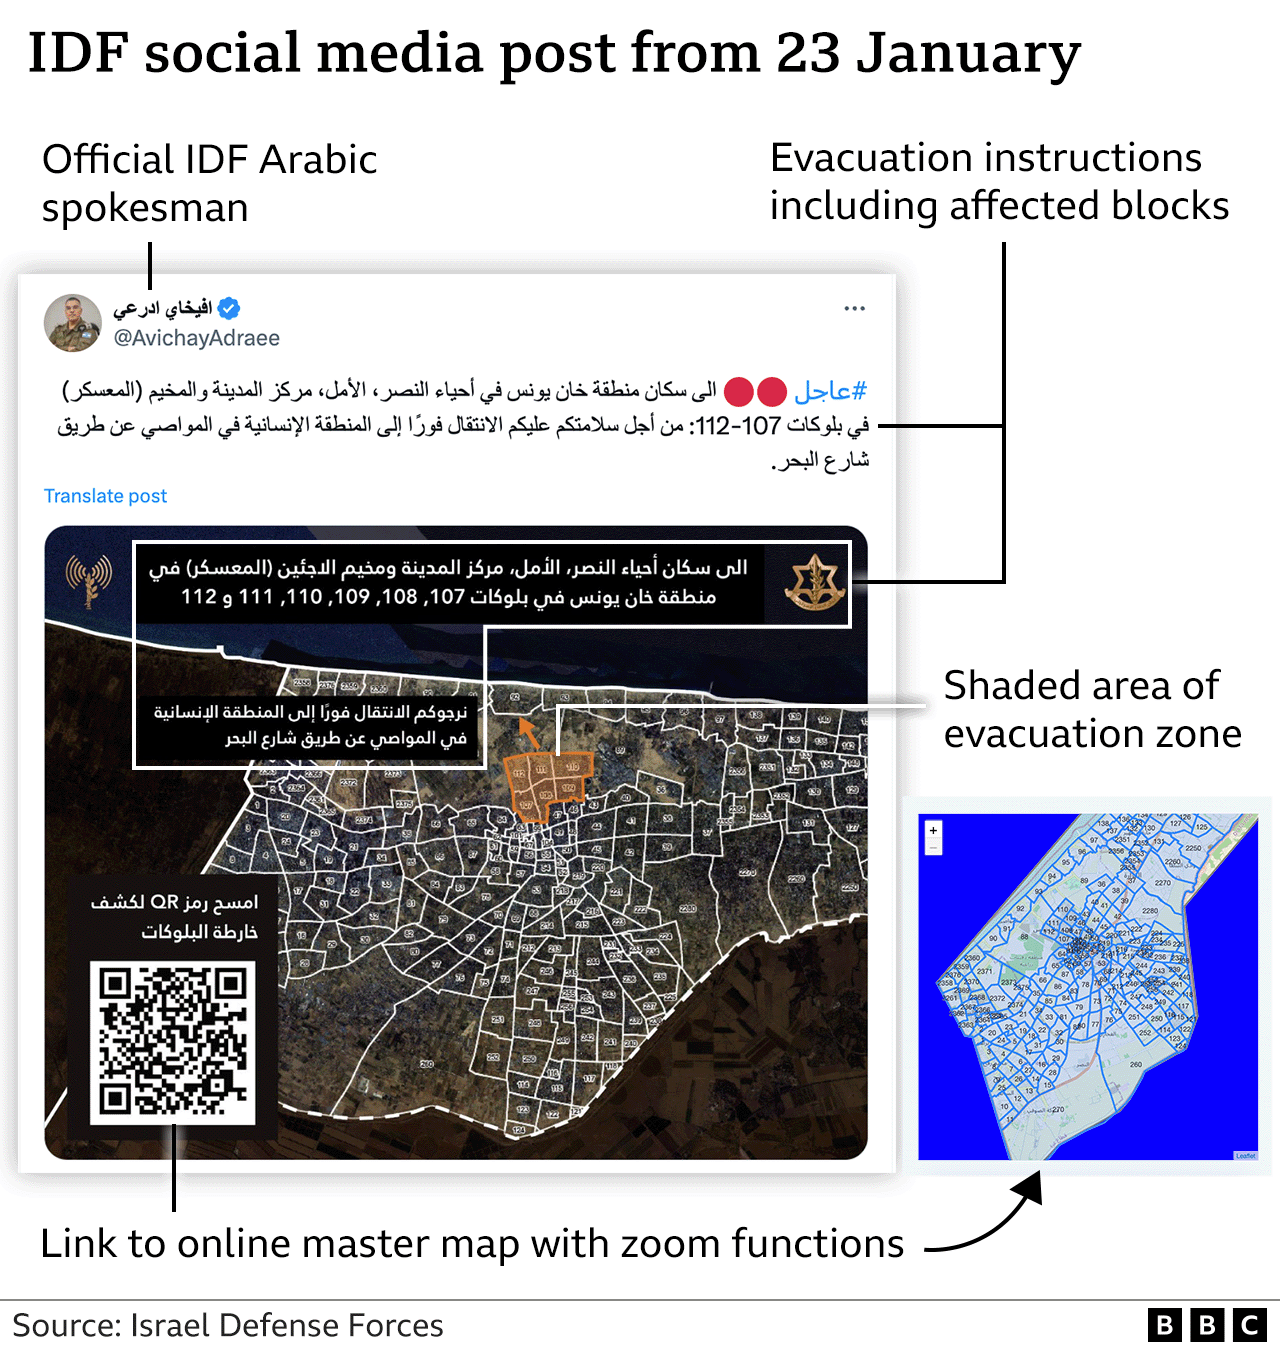 Graphic showing annotated IDF social media post - highlighting the evacuation instructions, the shaded evacuation area and the QR code link to the IDF's online master map